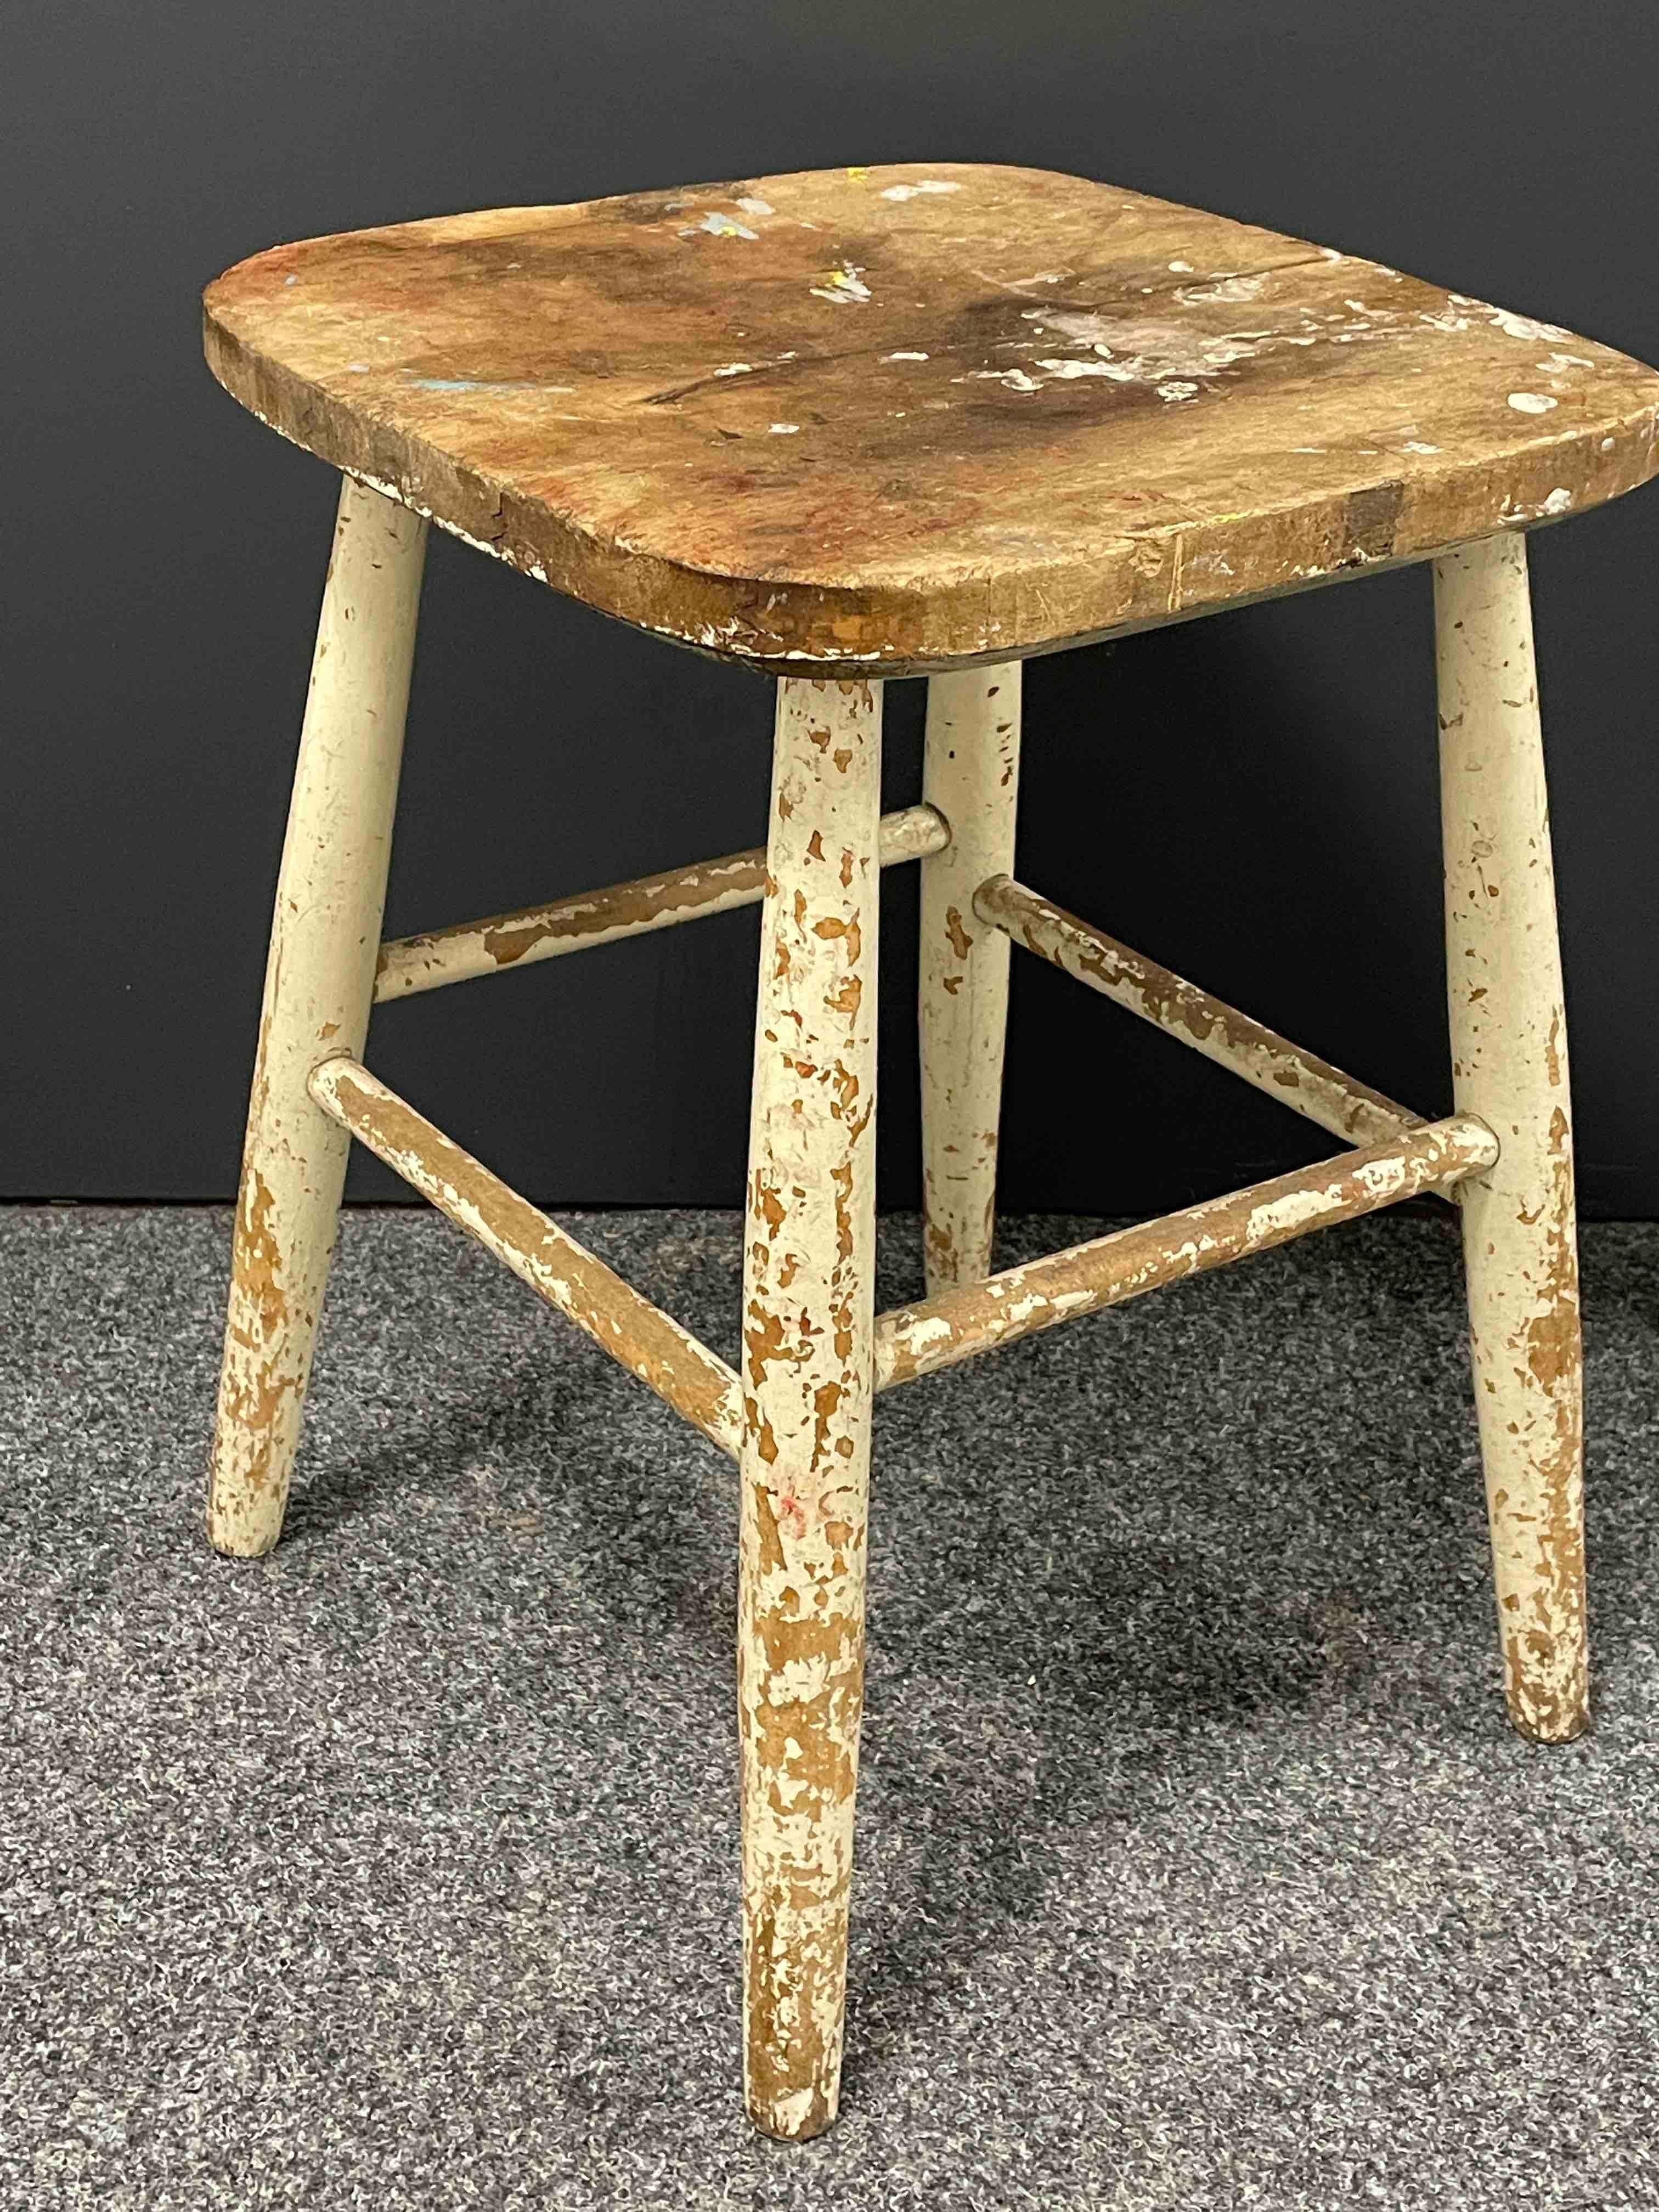 Hand-Crafted Early 20th Century Wabi Sabi 4 Leg Milking Stool Seat, Sweden Around 1910s For Sale